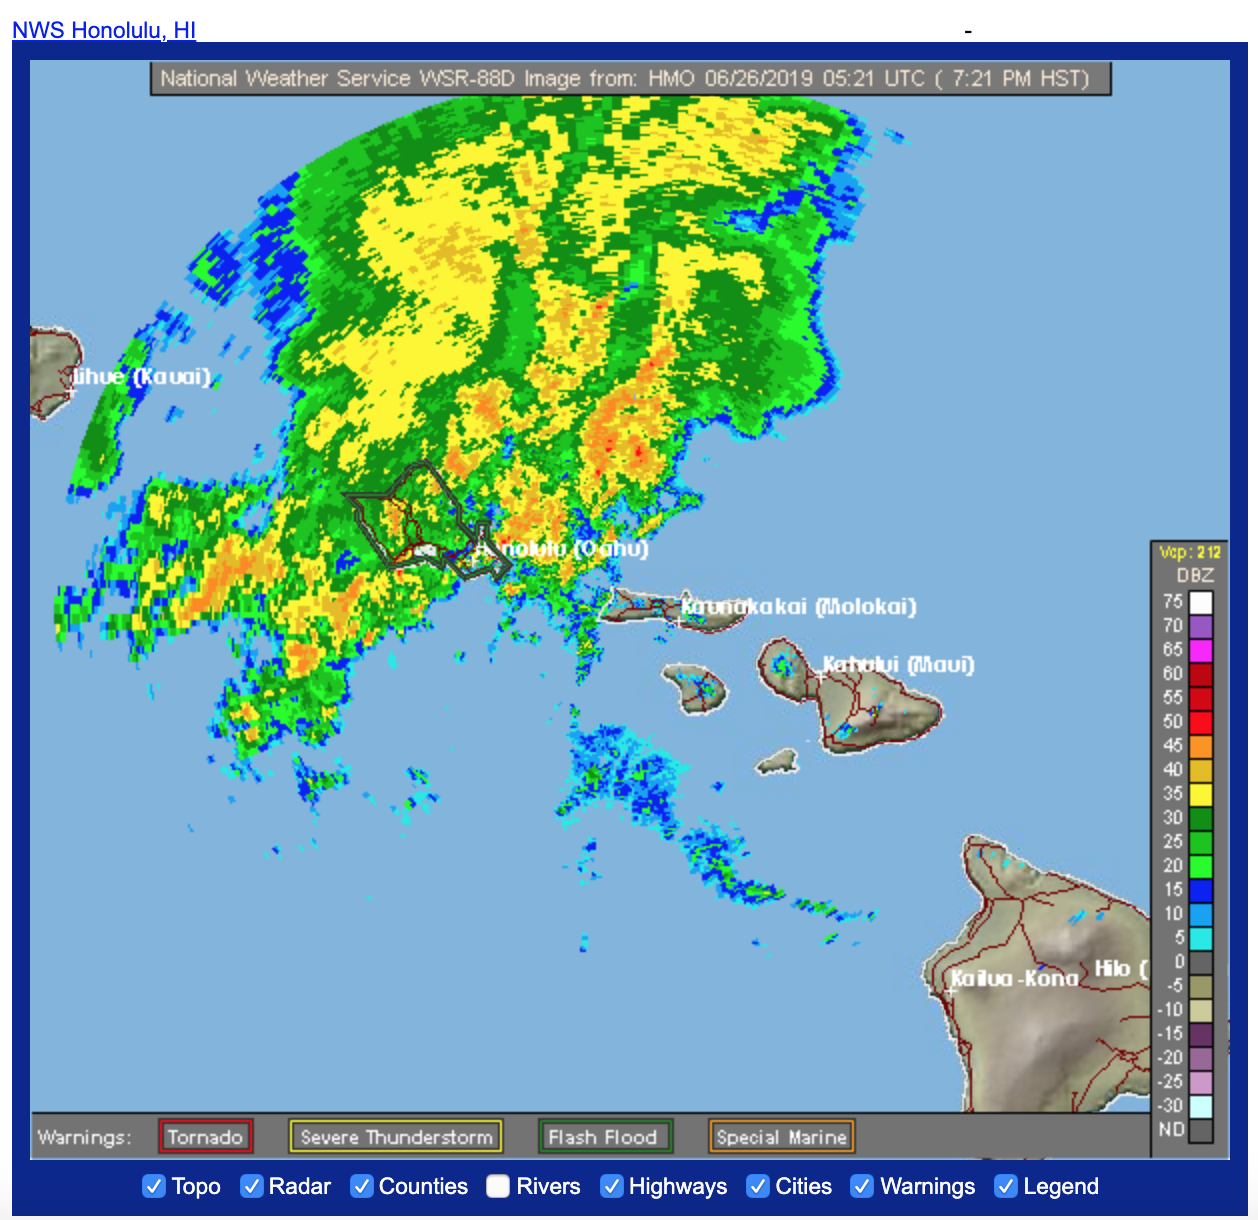 More Heavy Rains, Thunderstorms Possible For Oahu On Wednesday Hawaii